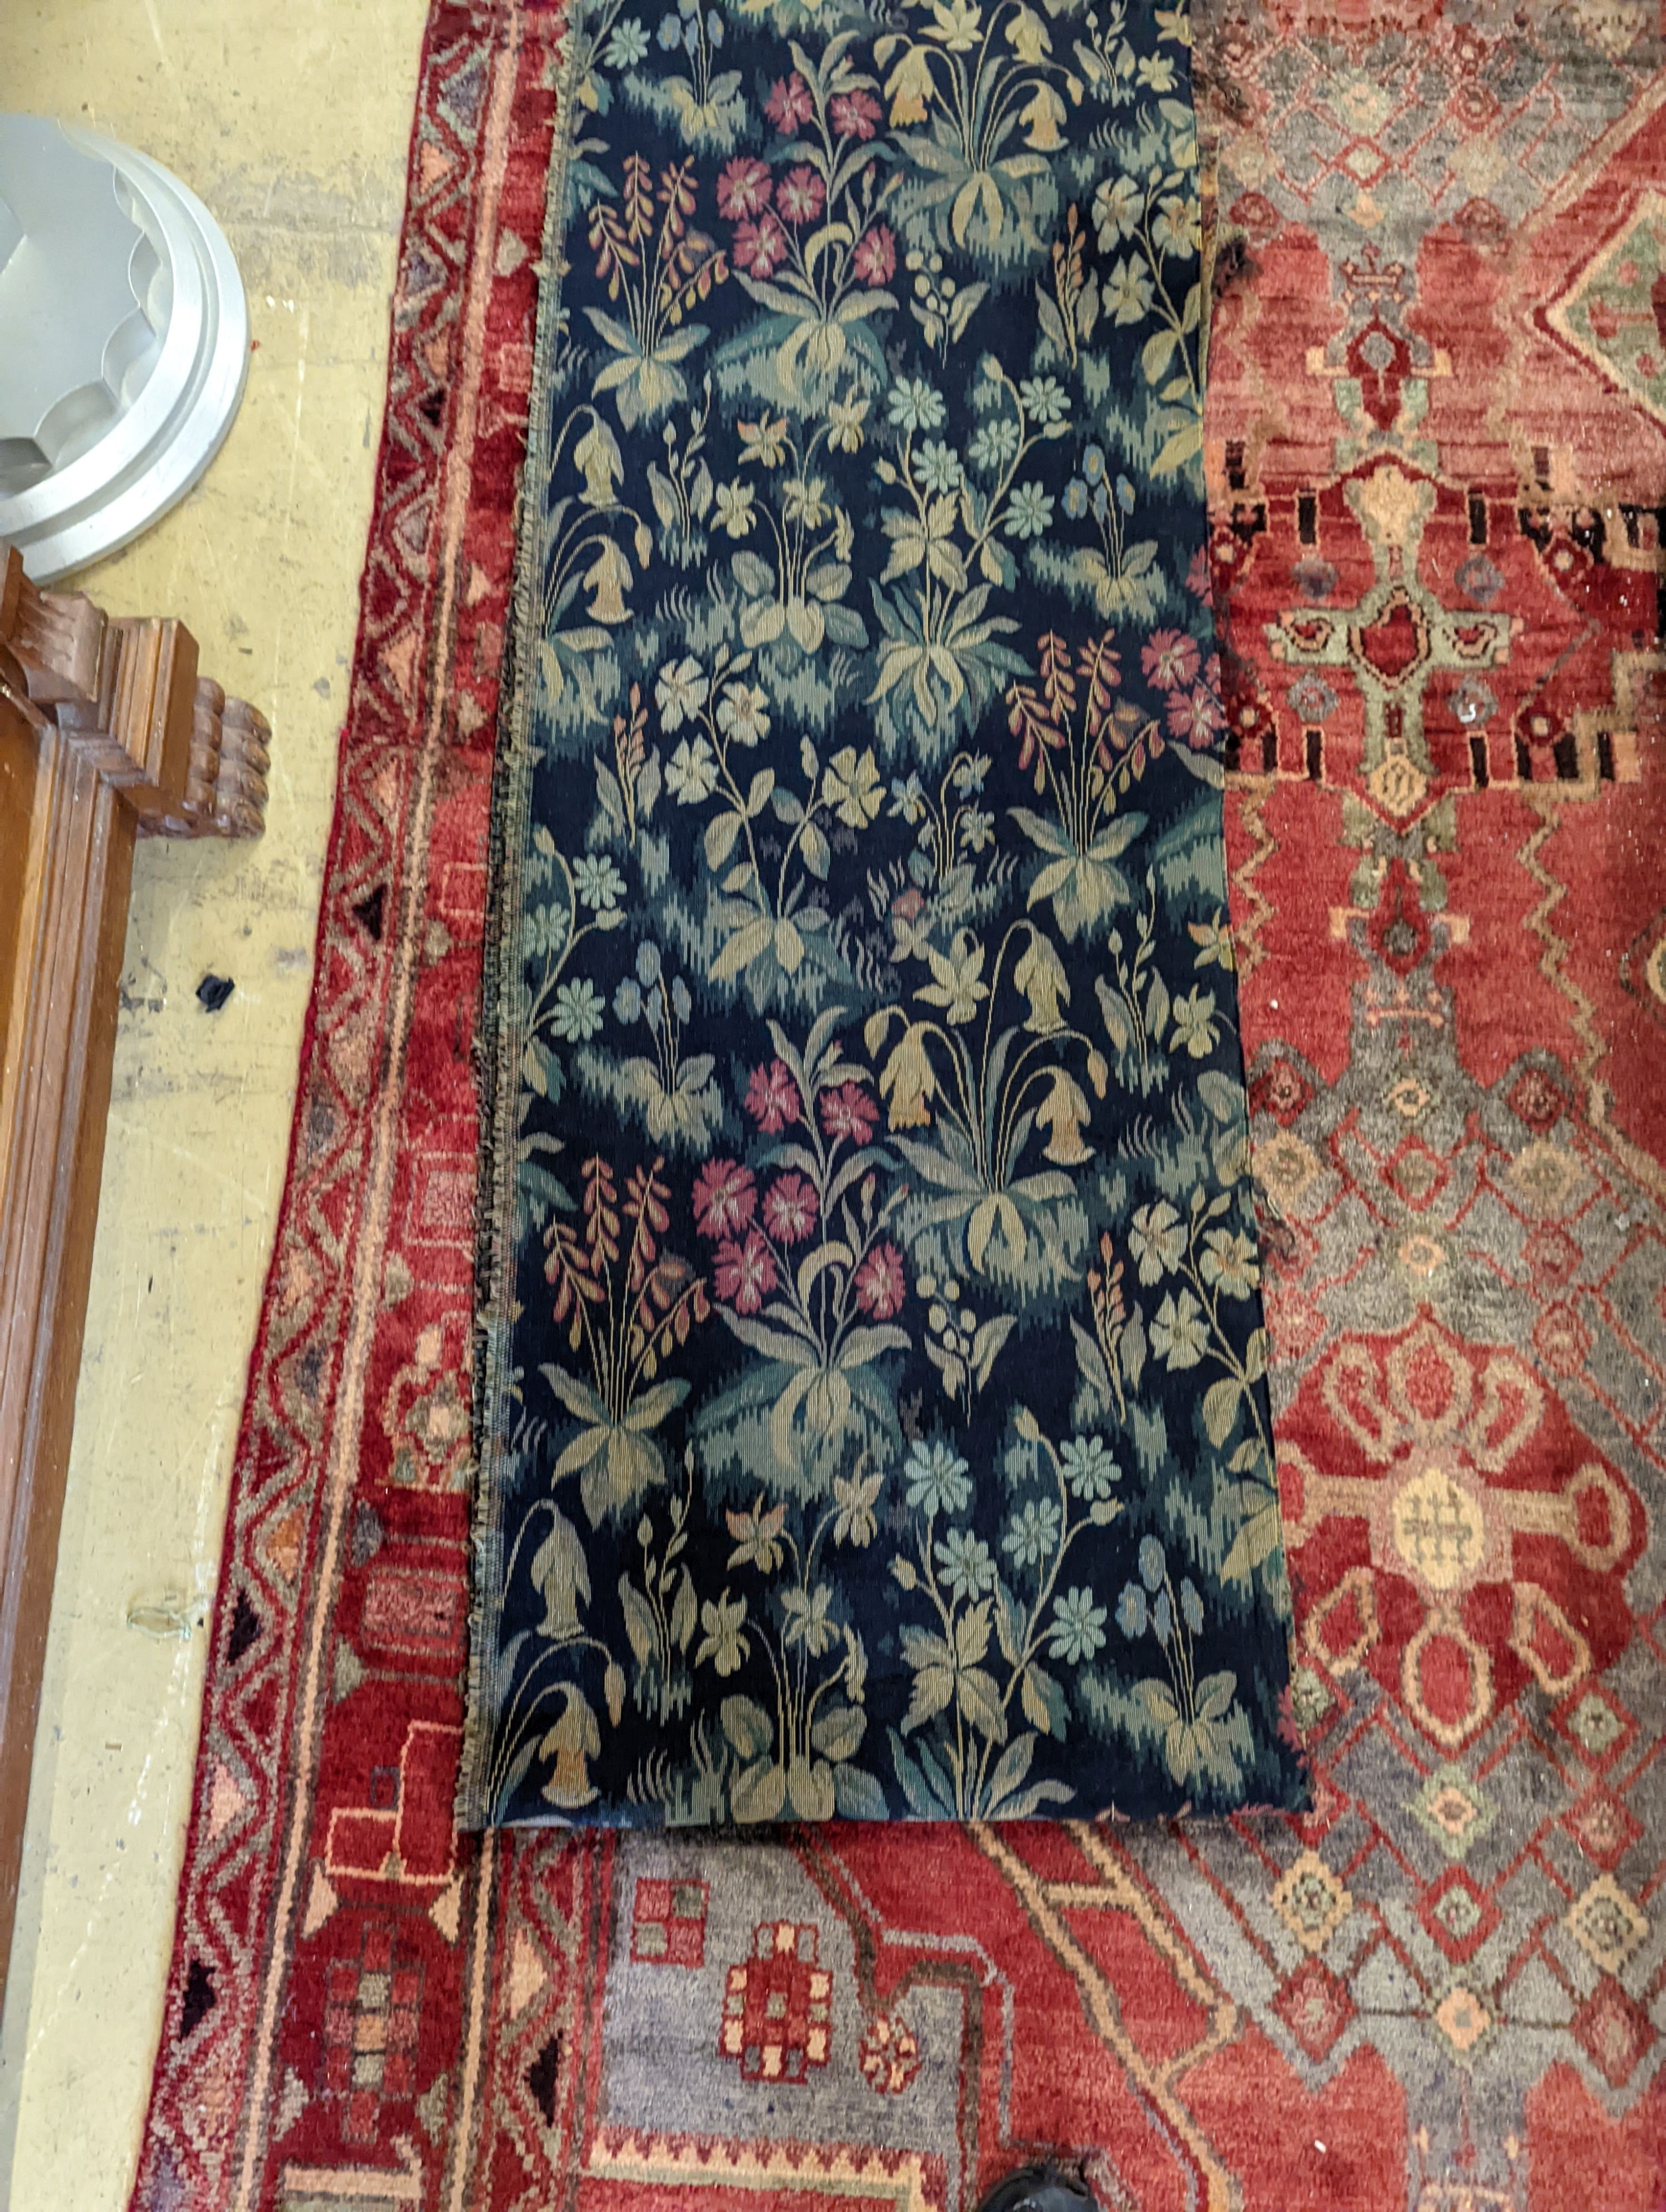 Length of machine tapestry fabric with flowers on a black ground, 420 x 52cm together with a Caucasian rug faced cushion and an antique English needlework panel with stylised scrolls 175 x 67cm